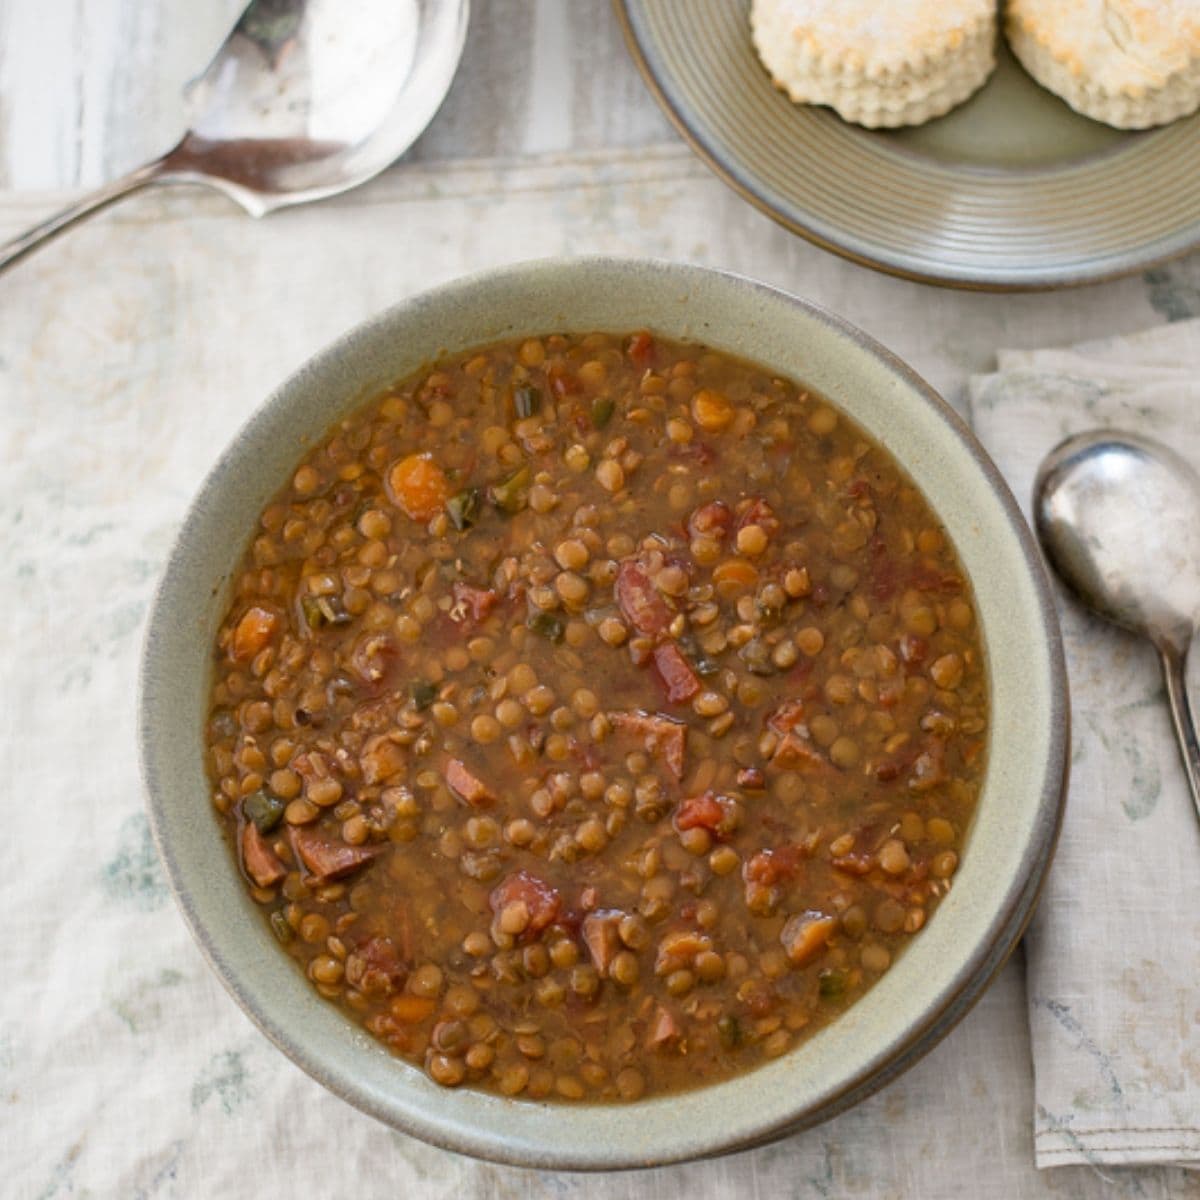 Lentil and ham soup in a bowl with biscuits.